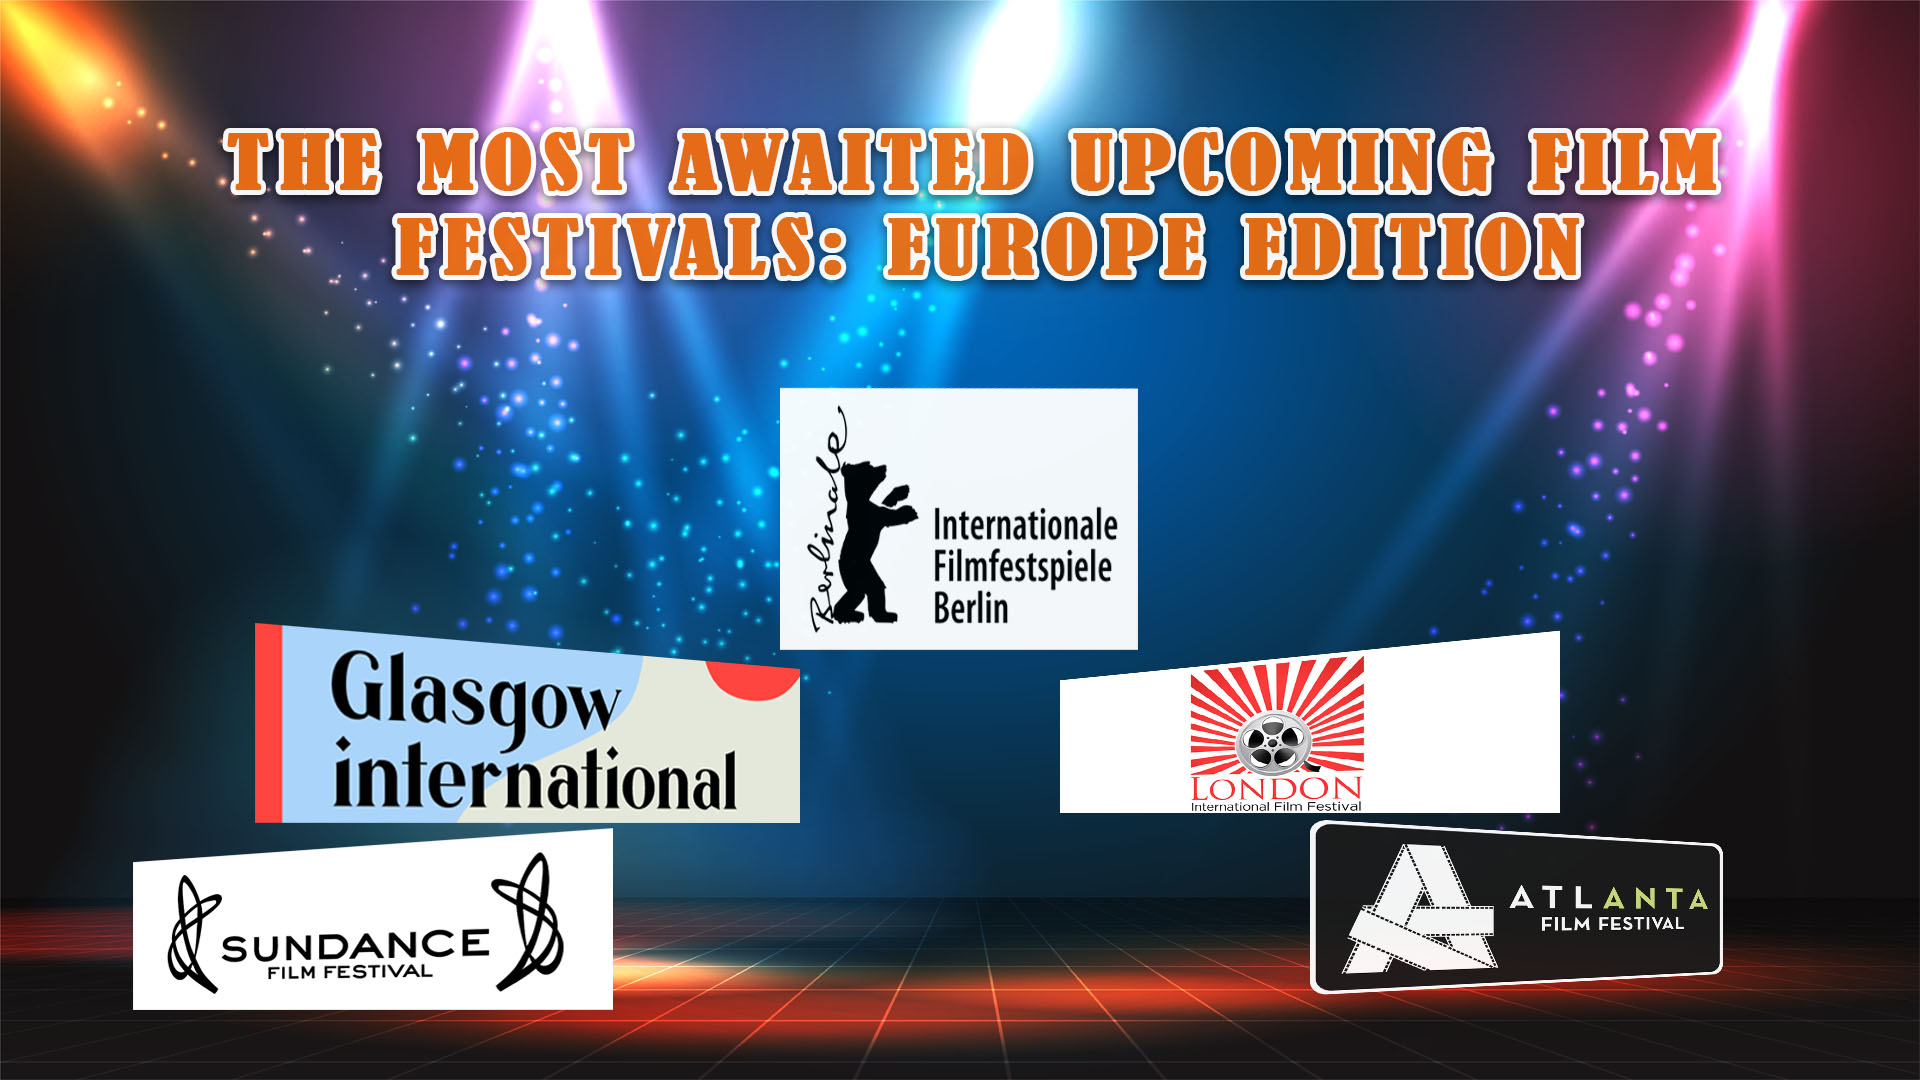 The Most Awaited Upcoming Film Festival: Europe Edition